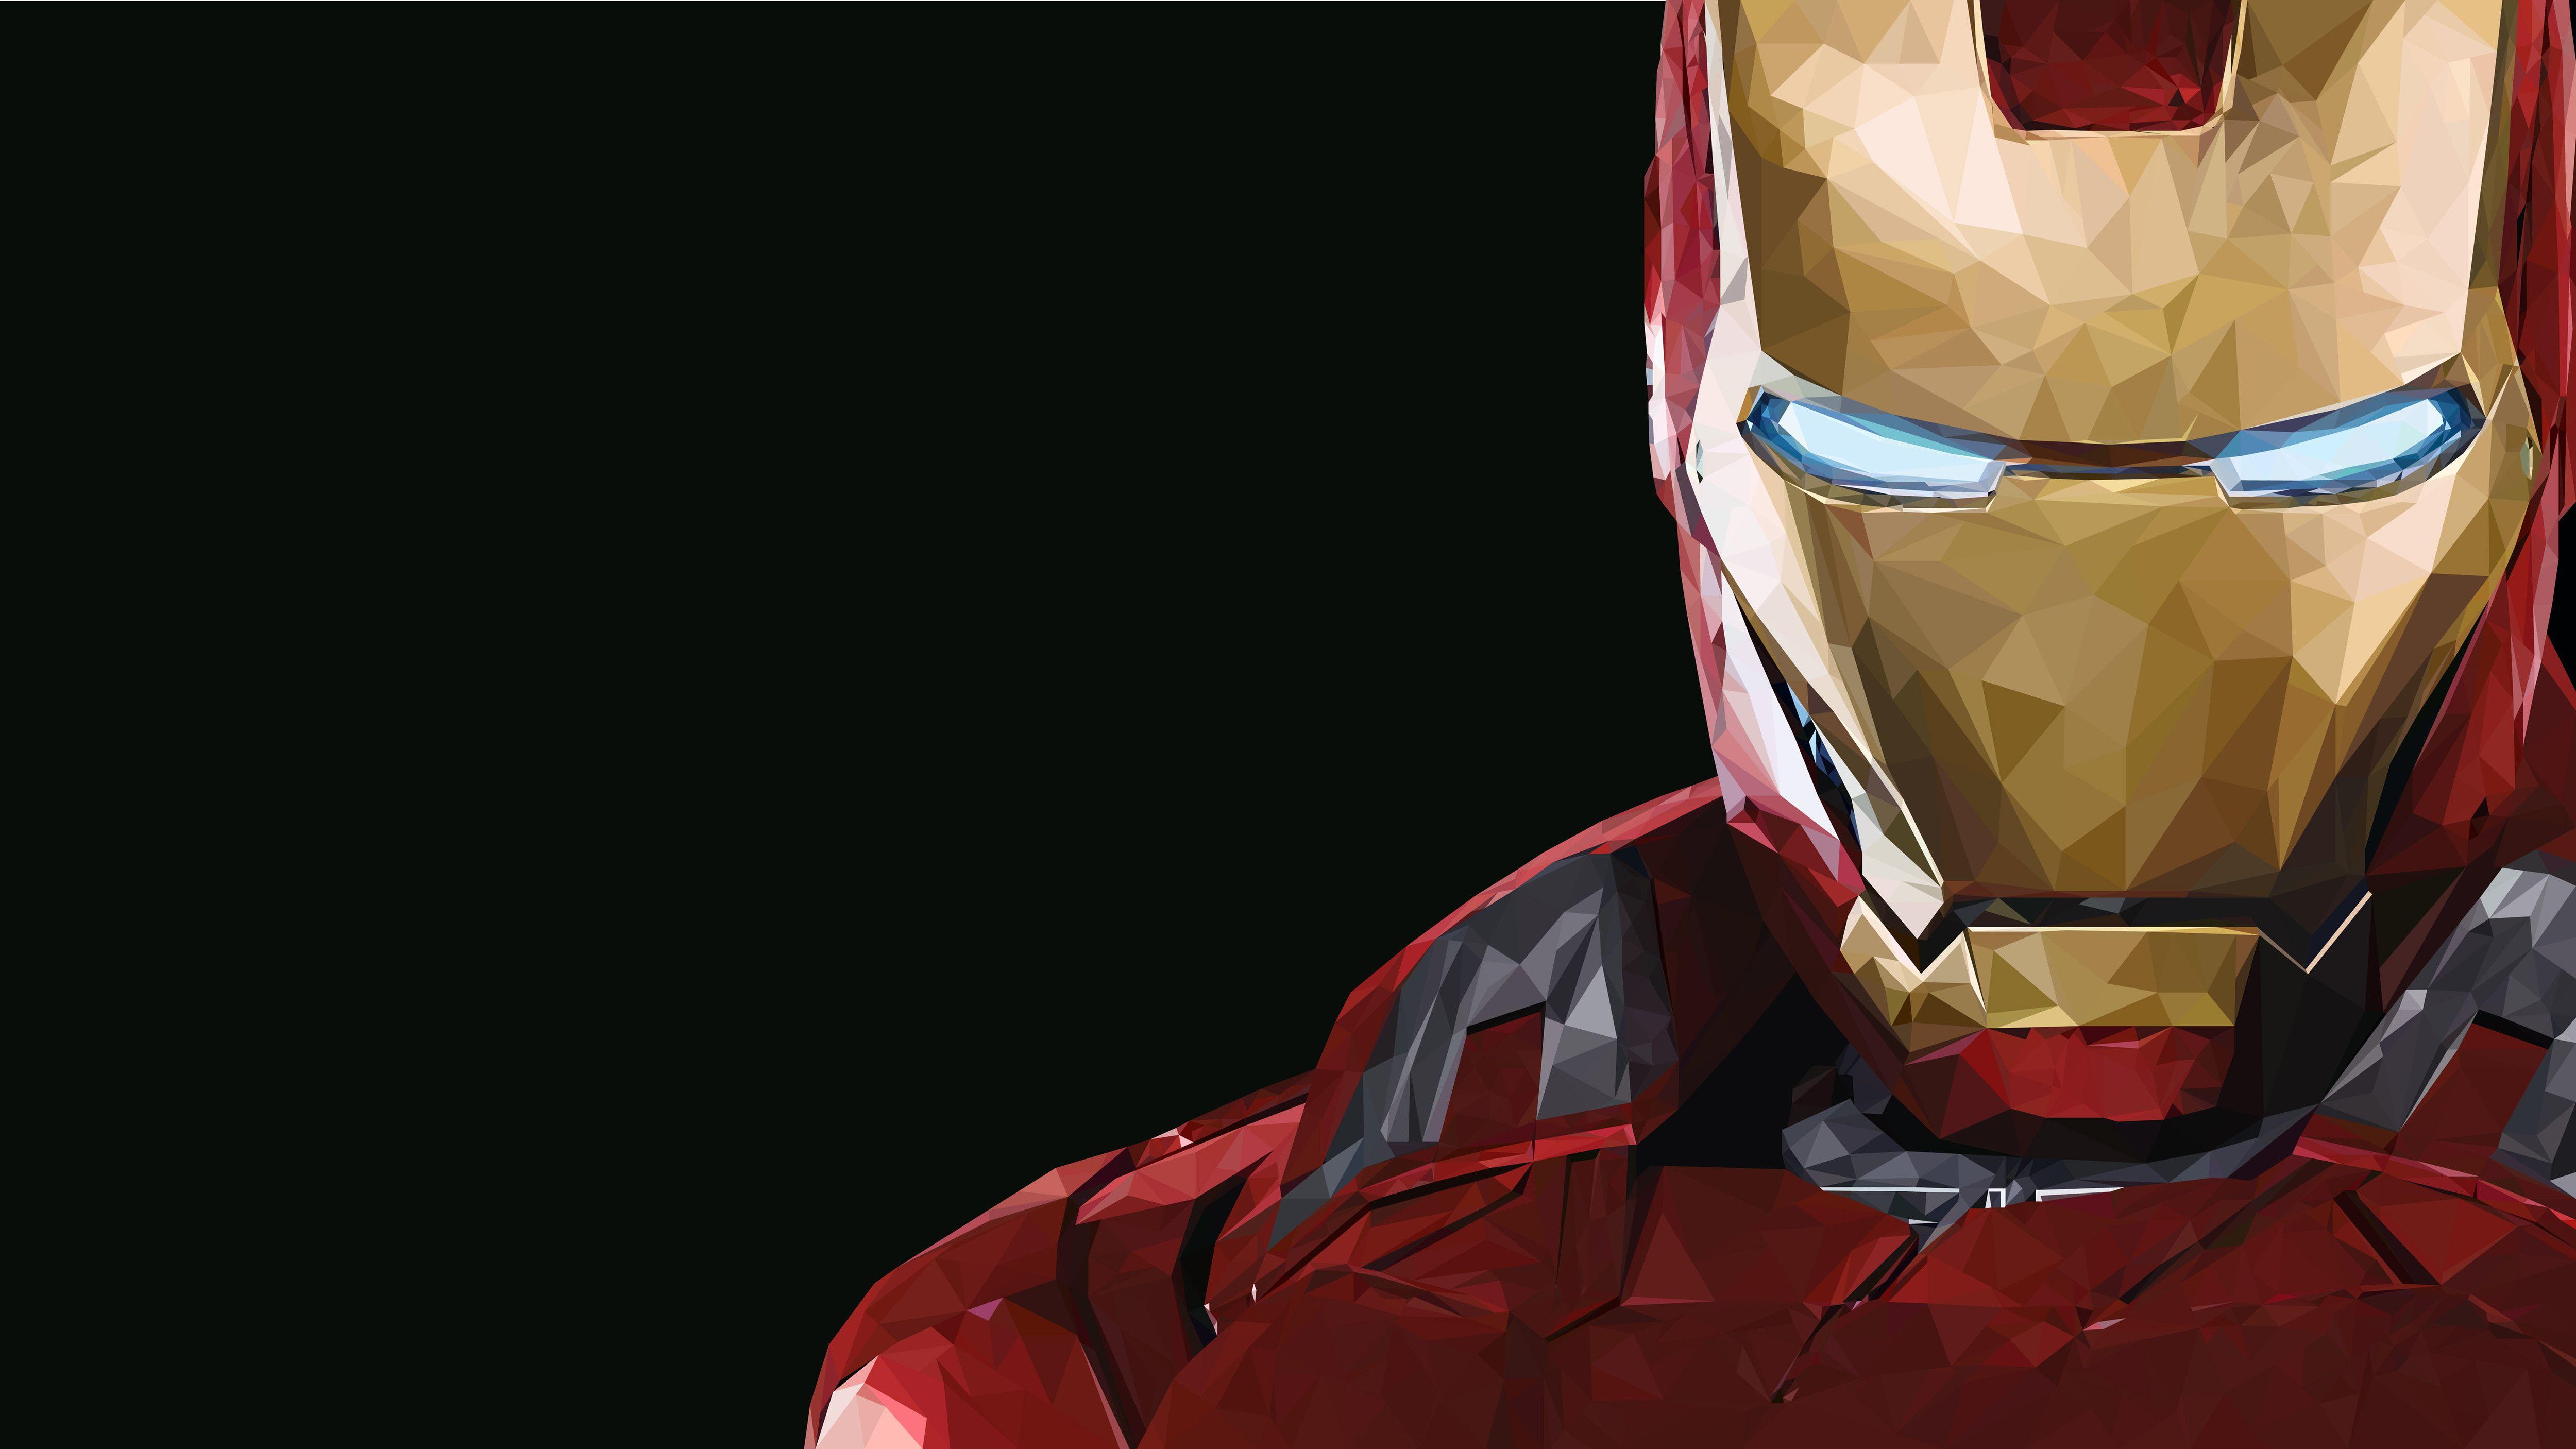 4K Wallpaper For Pc Of Iron Man Gallery  Iron man hd wallpaper Iron man  wallpaper Iron man